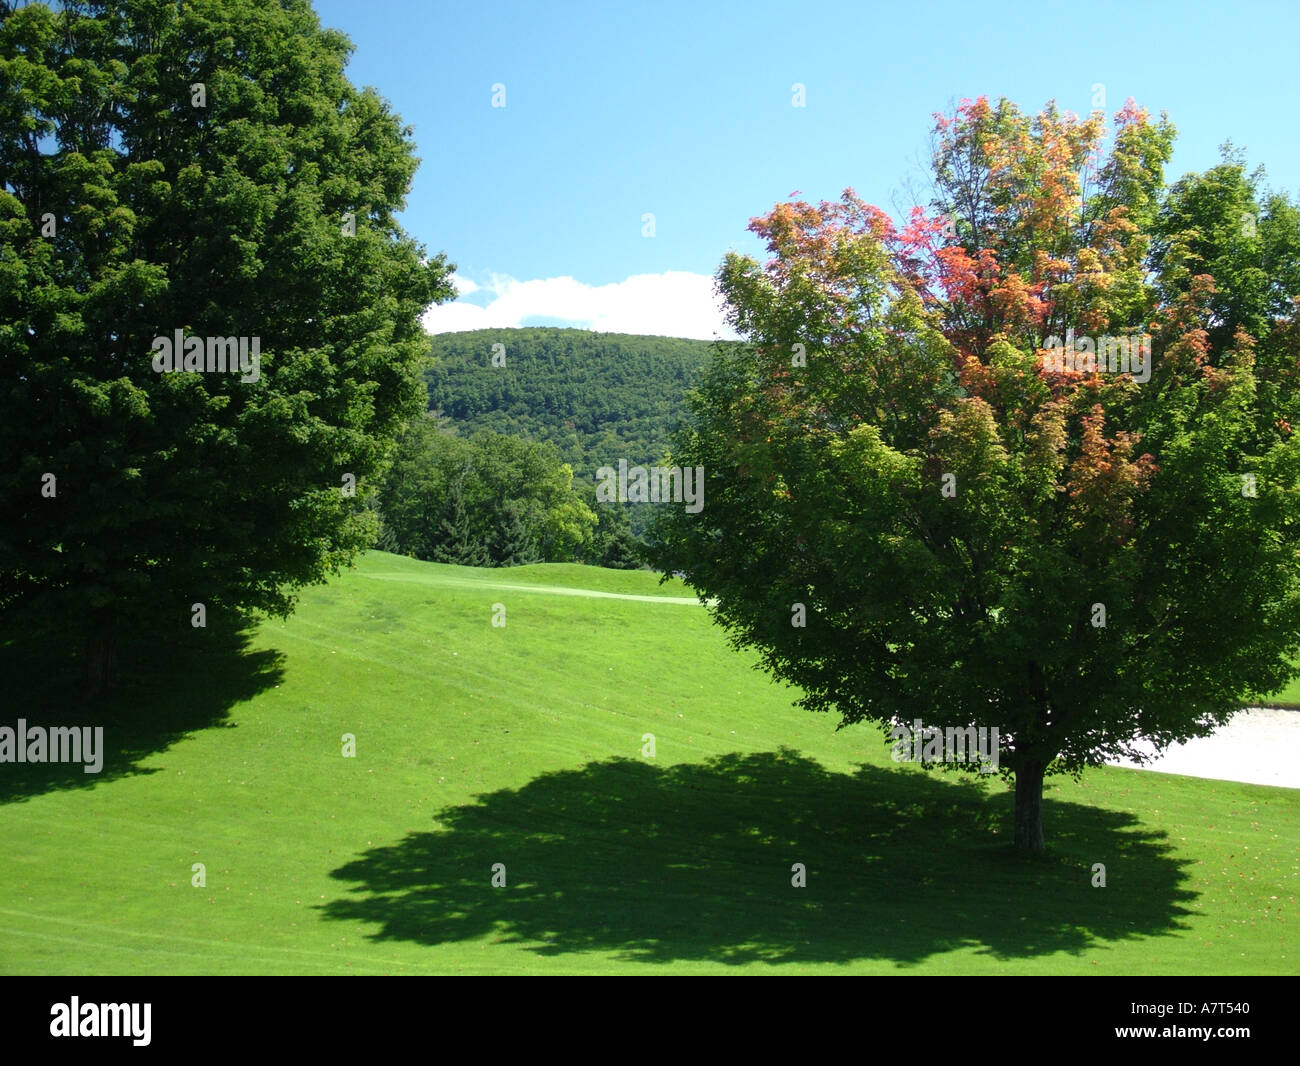 AJD36999, Cooperstown, NY, New York Stock Photo